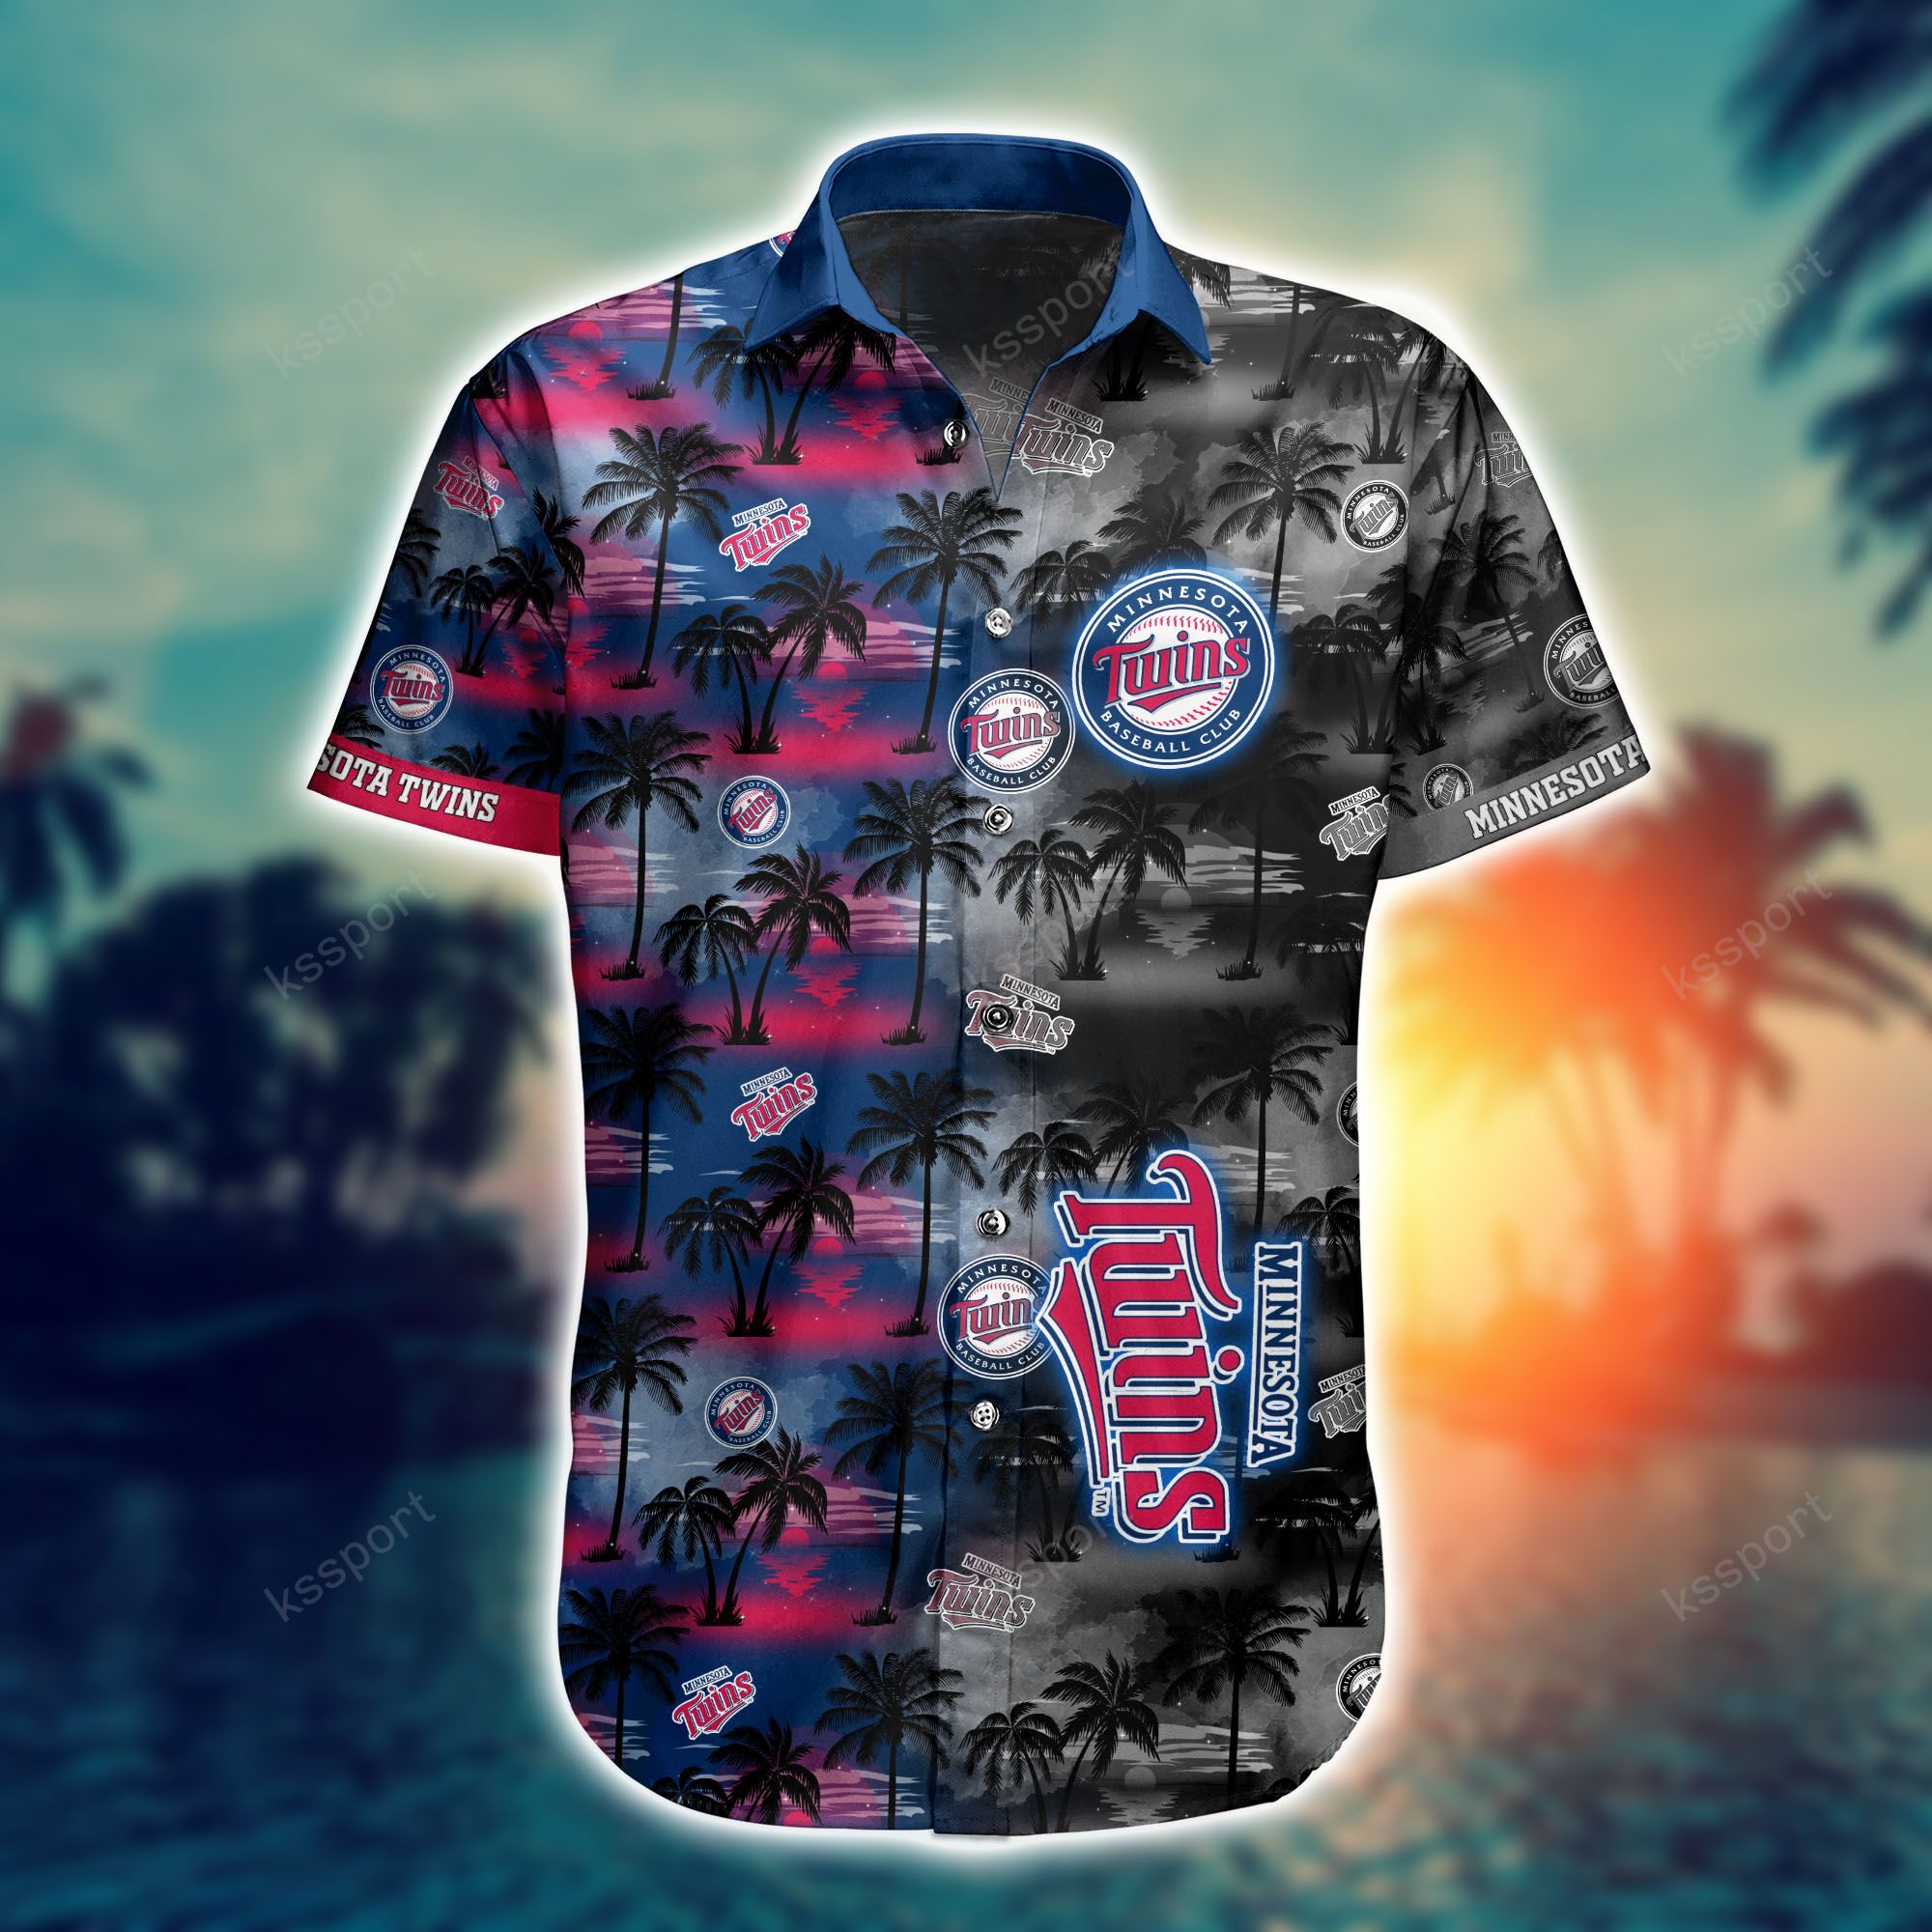 Top cool Hawaiian shirt 2022 - Make sure you get yours today before they run out! 226